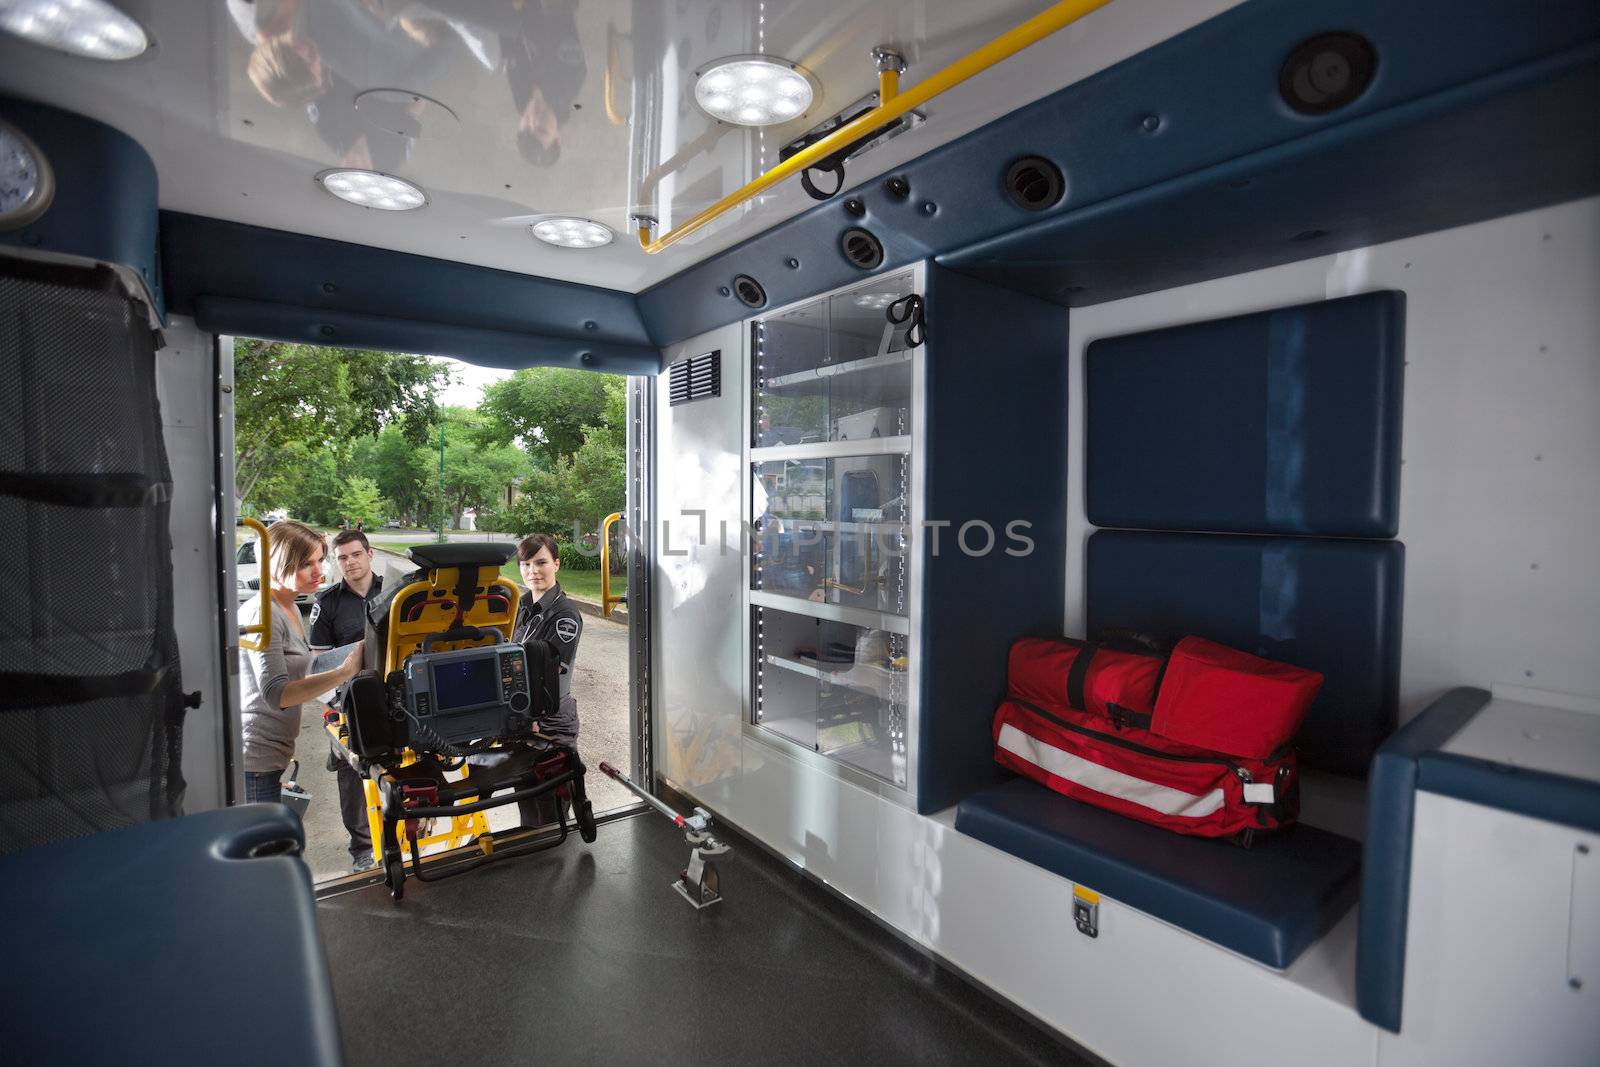 Interior of ambulance with stretcher being loaded